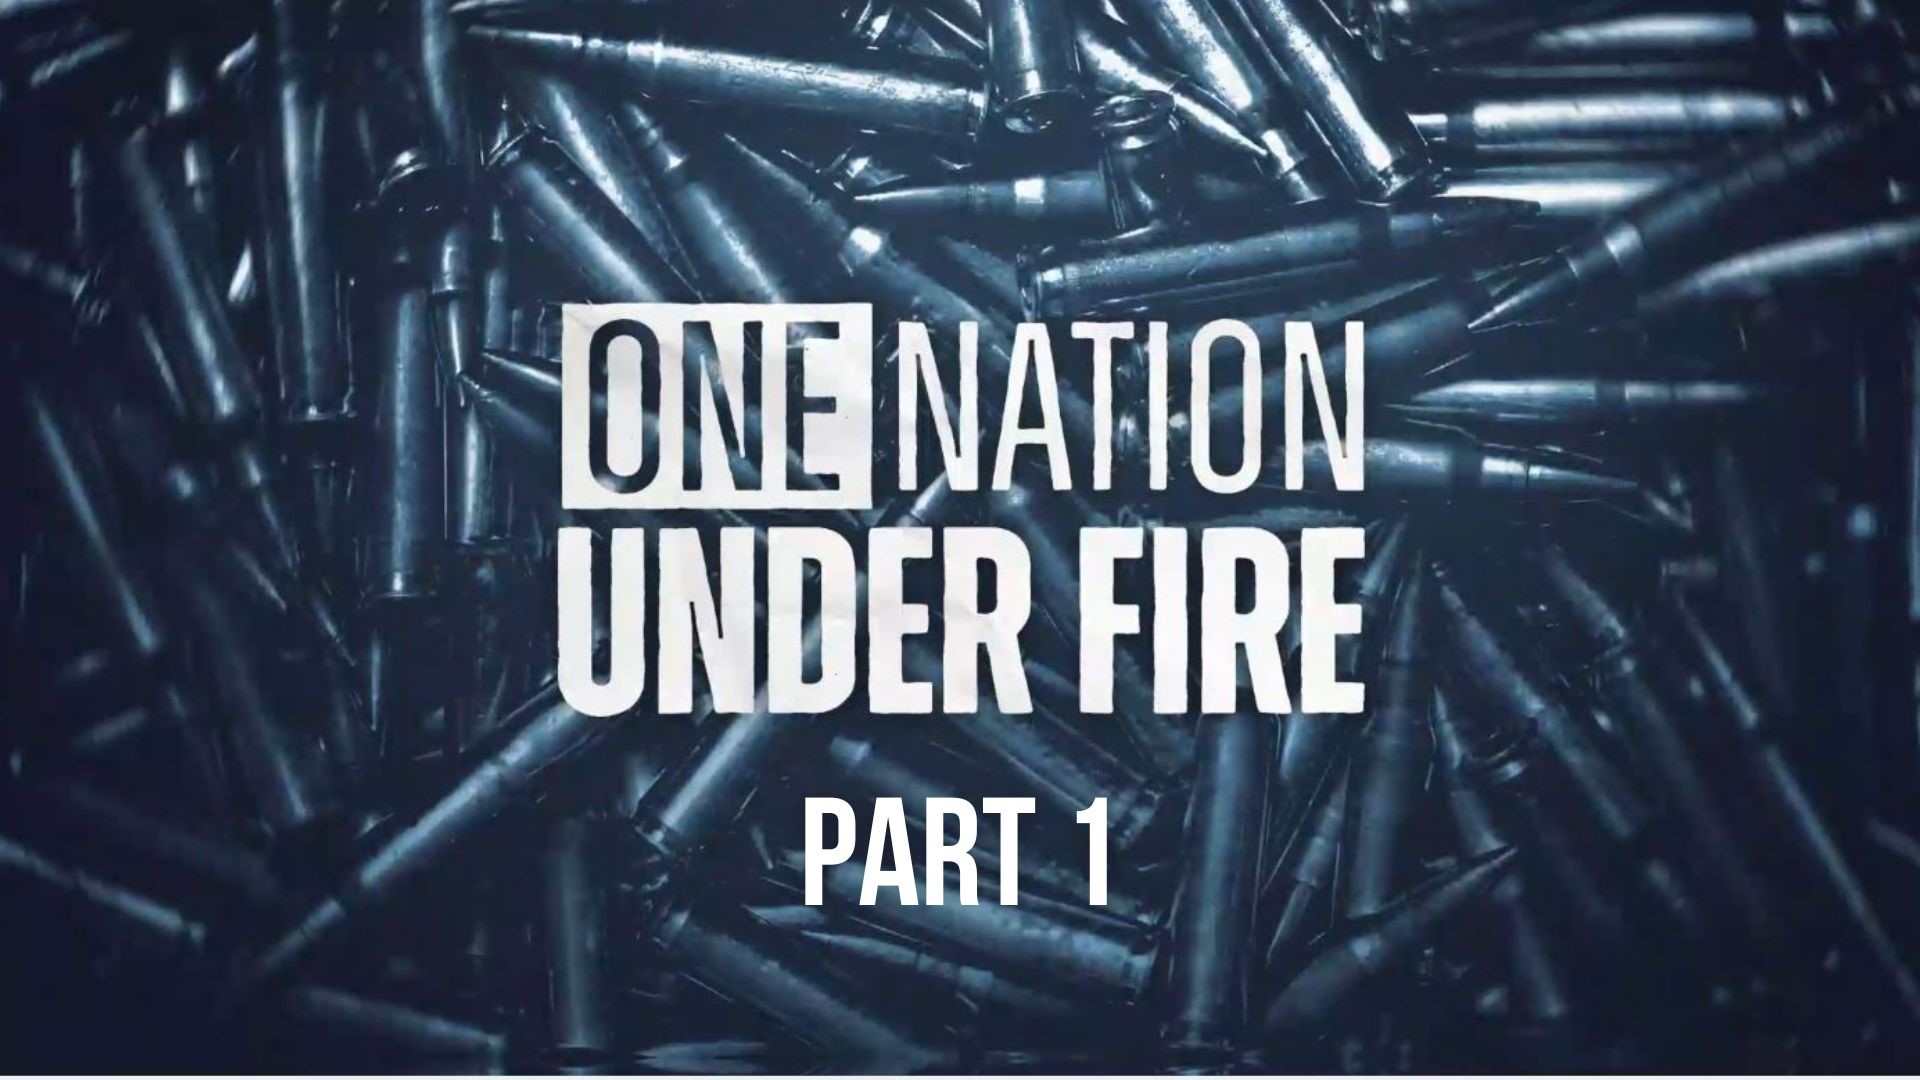 The first part of a TEGNA special looking into the state of gun violence in the U.S. From the increase in school and mass shootings to the fight for protection.